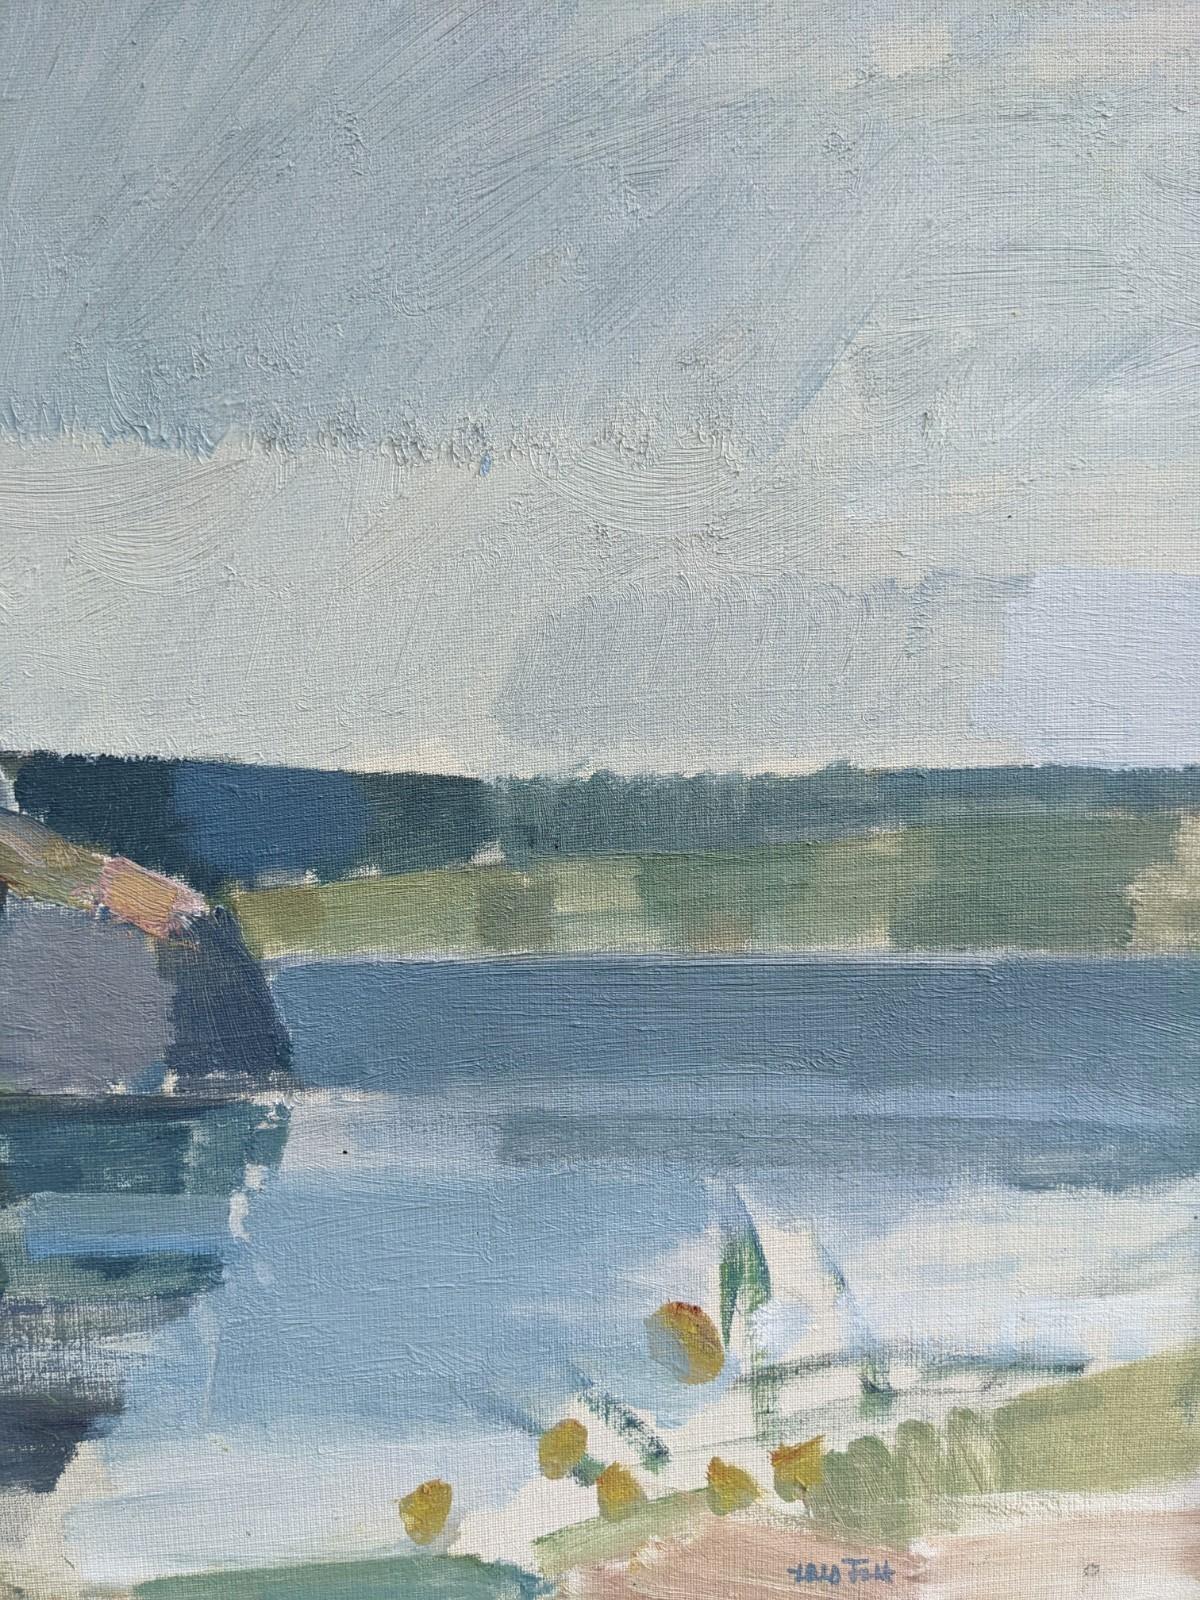 GENTIL
Size: 53 x 73 cm (including frame)
Oil on Canvas

A soothing mid century lake landscape in oil, painted onto canvas.

Soft pastel colours have been applied in an expressive manner, creating a composition of a calming lake scene. There is